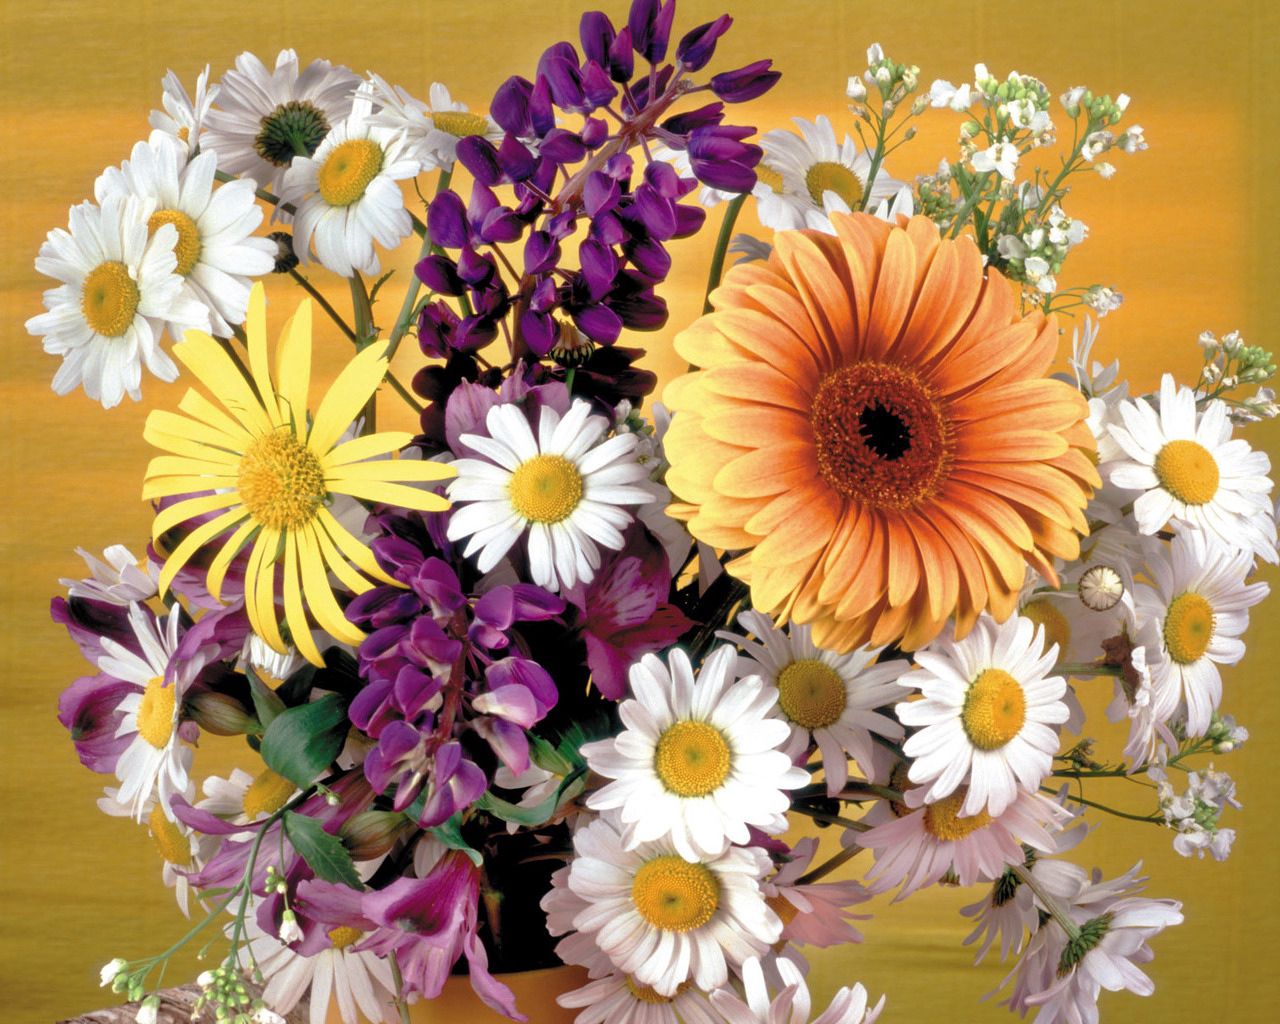 125913 download wallpaper flowers, camomile, gerberas, registration, typography, beauty, bouquet, vase screensavers and pictures for free